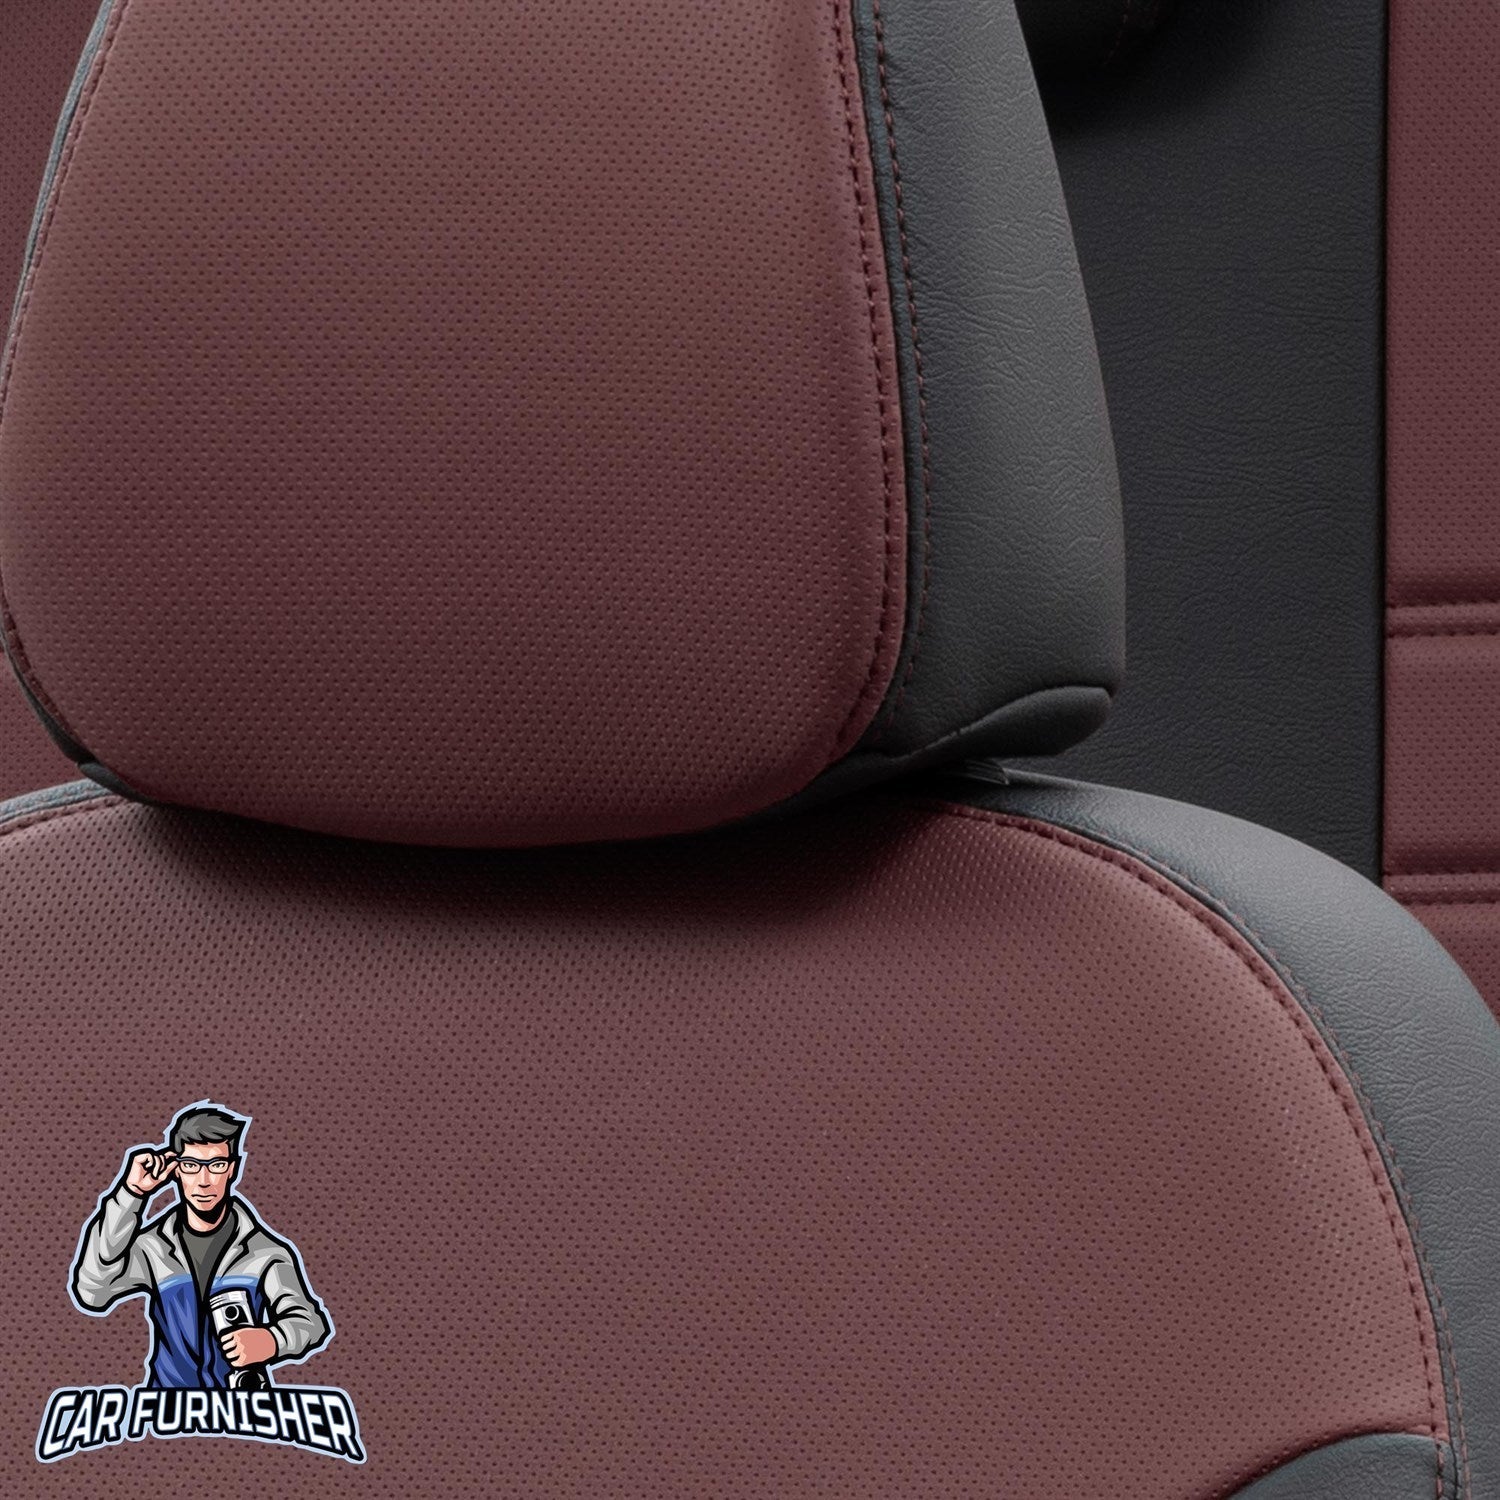 Isuzu D-Max Seat Covers Istanbul Leather Design Burgundy Leather